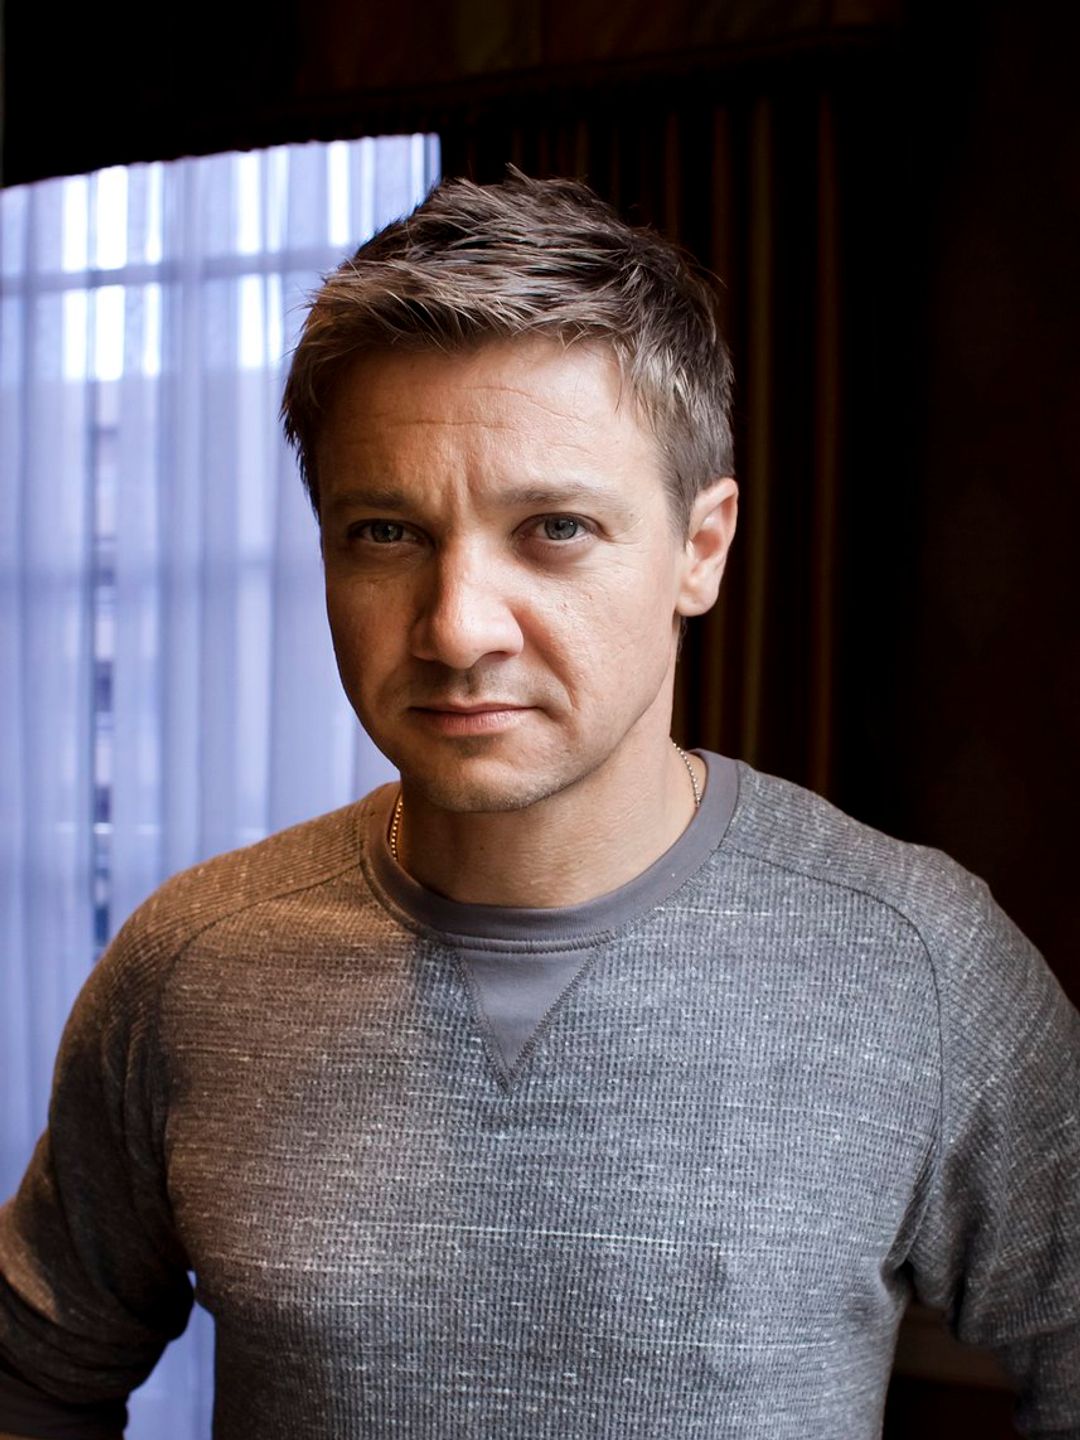 Jeremy Renner young photos